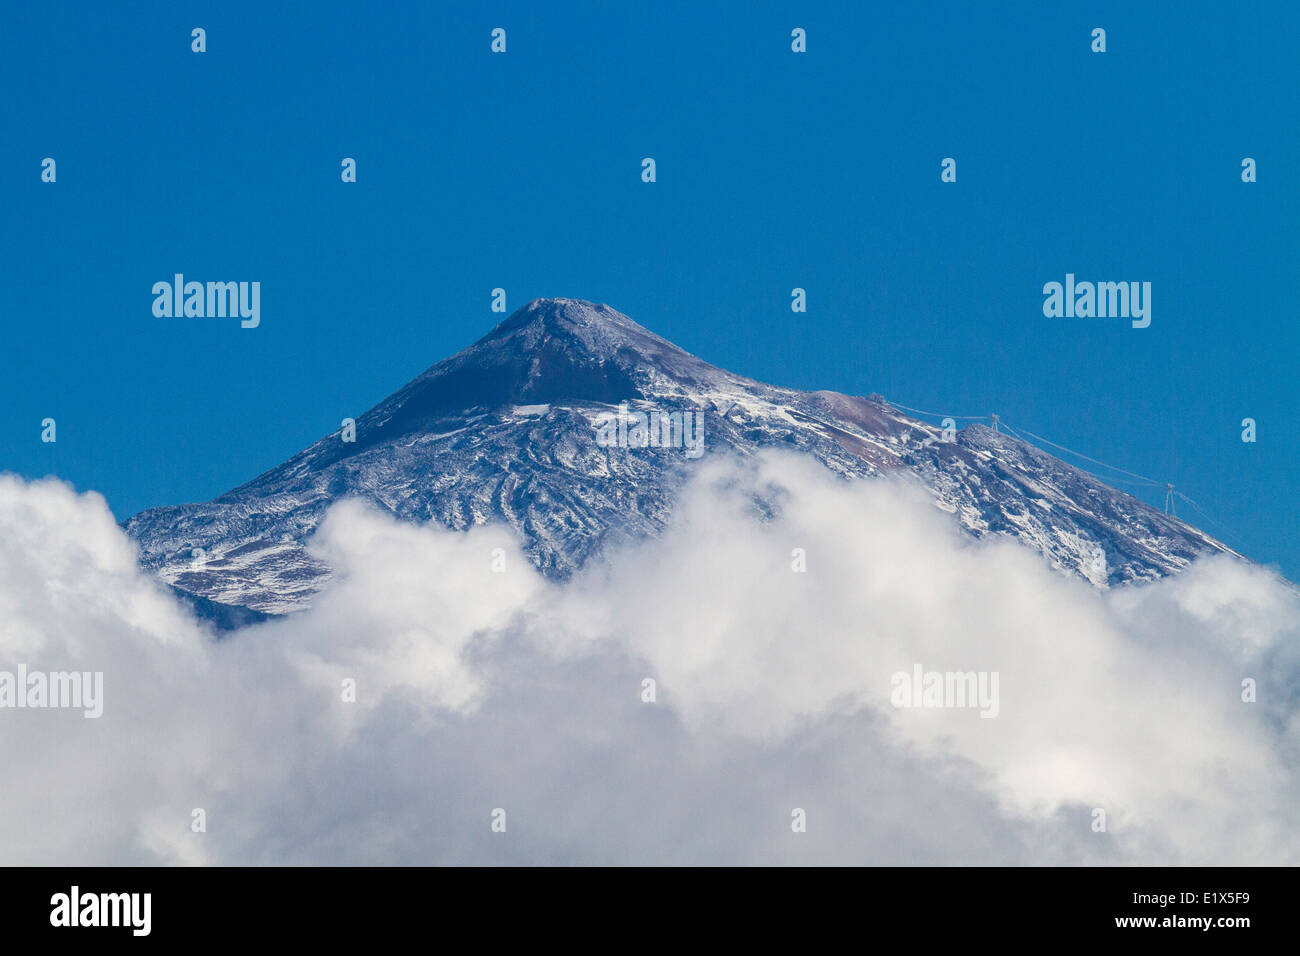 Peak of Mount Teide above the clouds on Tenerife in the Canary Islands, Spain Stock Photo